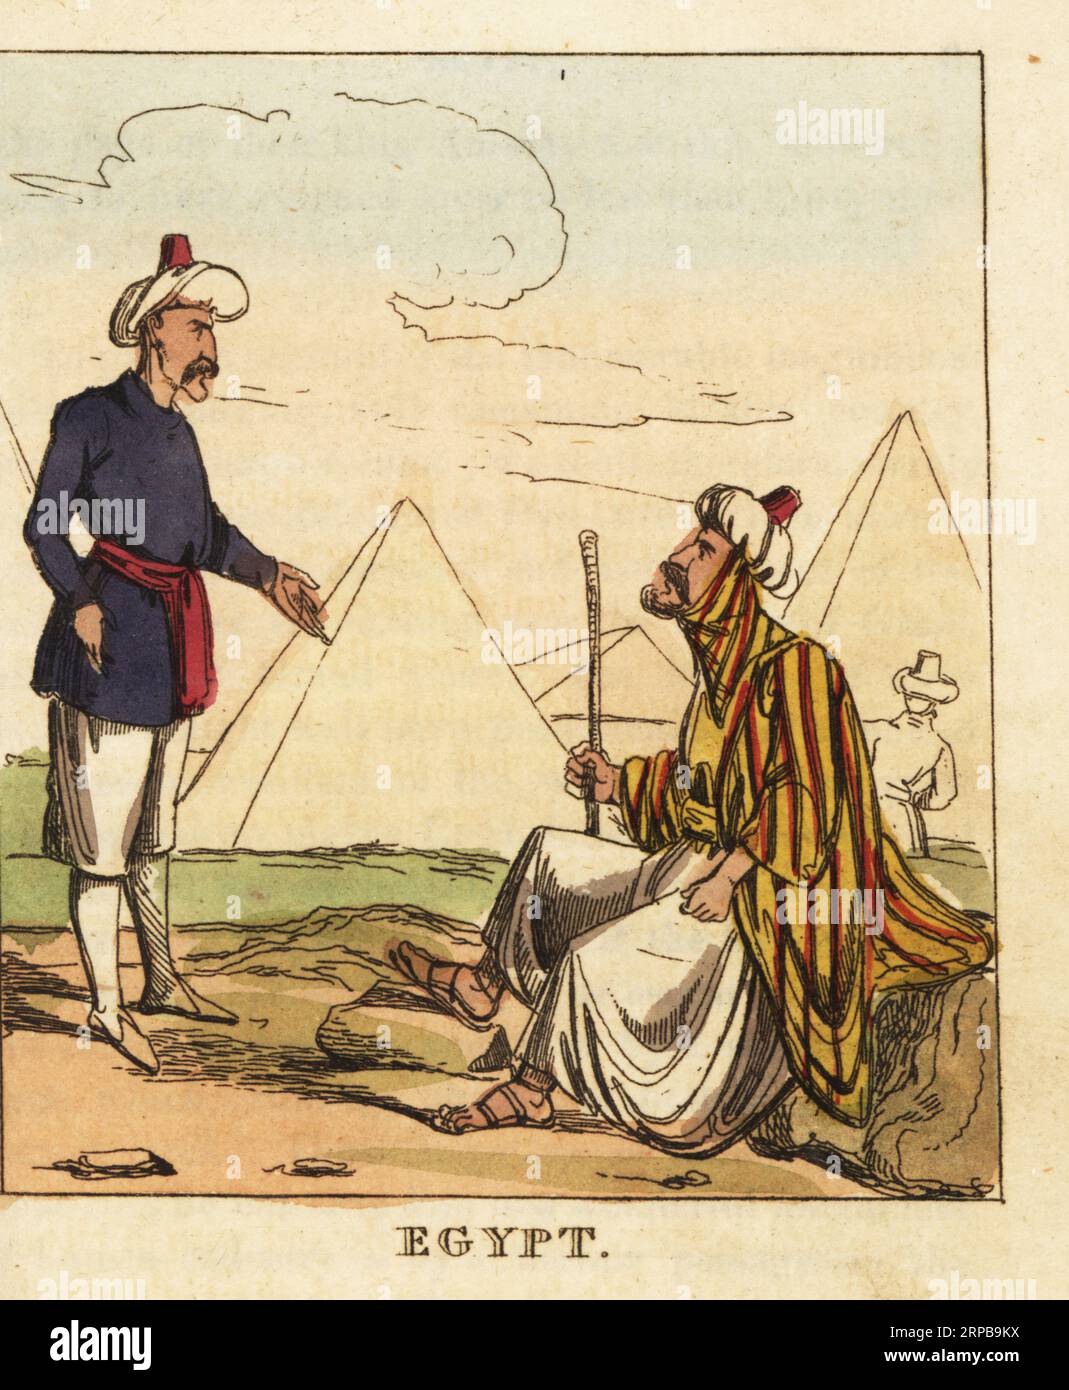 Costumes of the Eyalet of Egypt, 19th century. Two Egyptian men in front of the pyramids. Ottoman Turk in turban, striped robe, wide pantaloons and sandals. Mamluk or soldier in turban and uniform. Handcoloured copperplate engraving from The World in Miniature, or Panorama of the Costumes, Manners & Customs of All Nations, John Bysh, London, 1825. Stock Photo